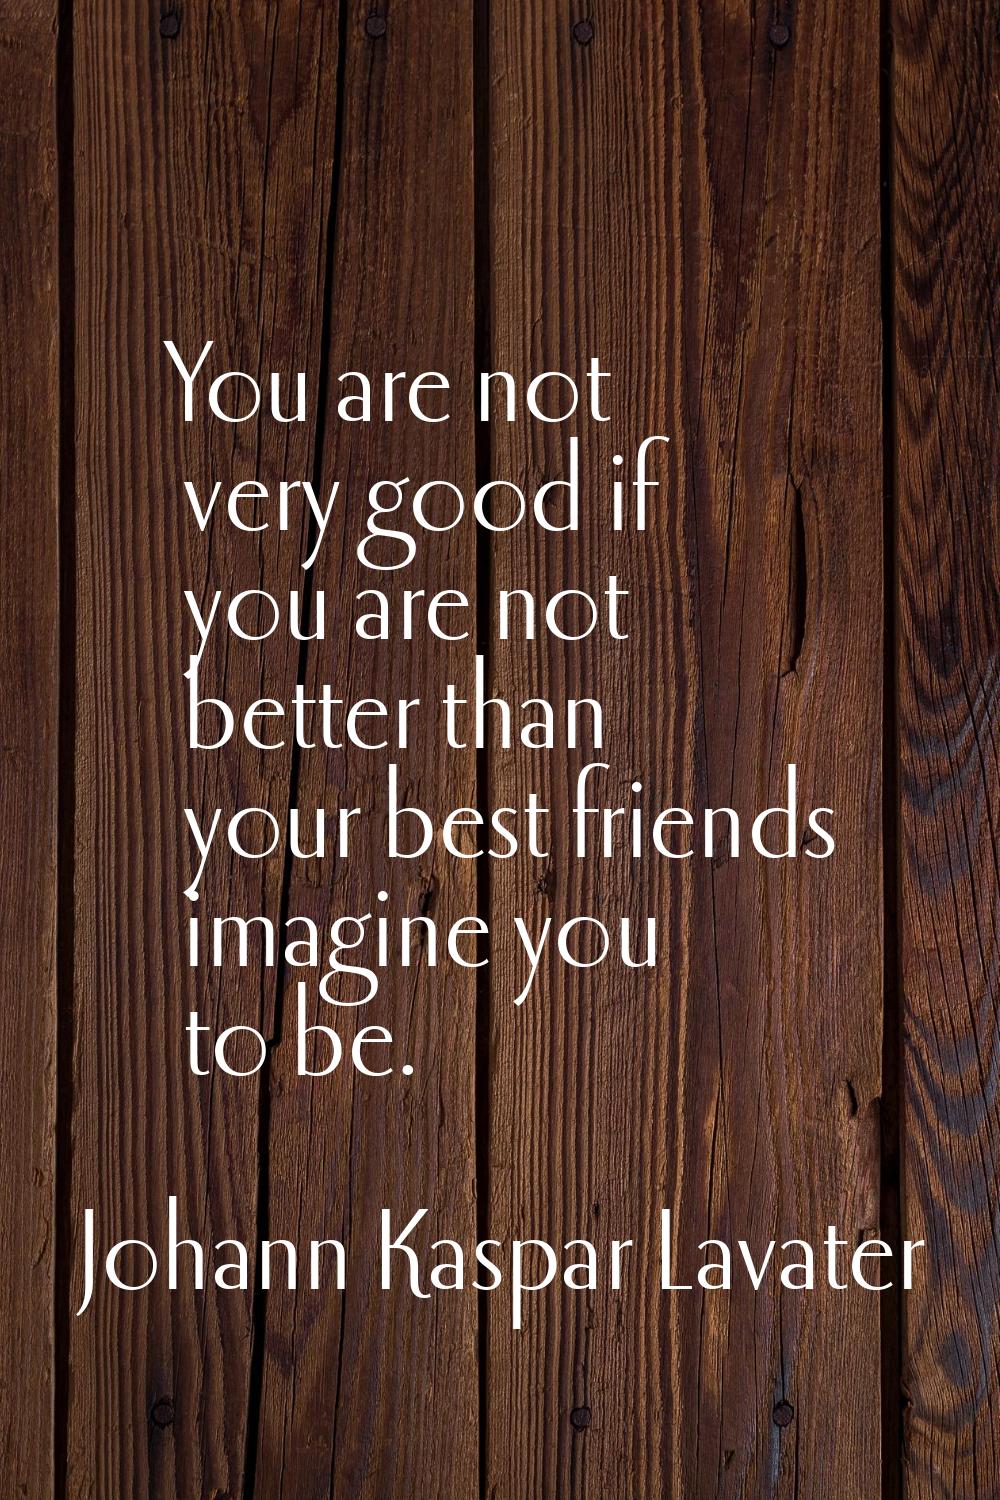 You are not very good if you are not better than your best friends imagine you to be.